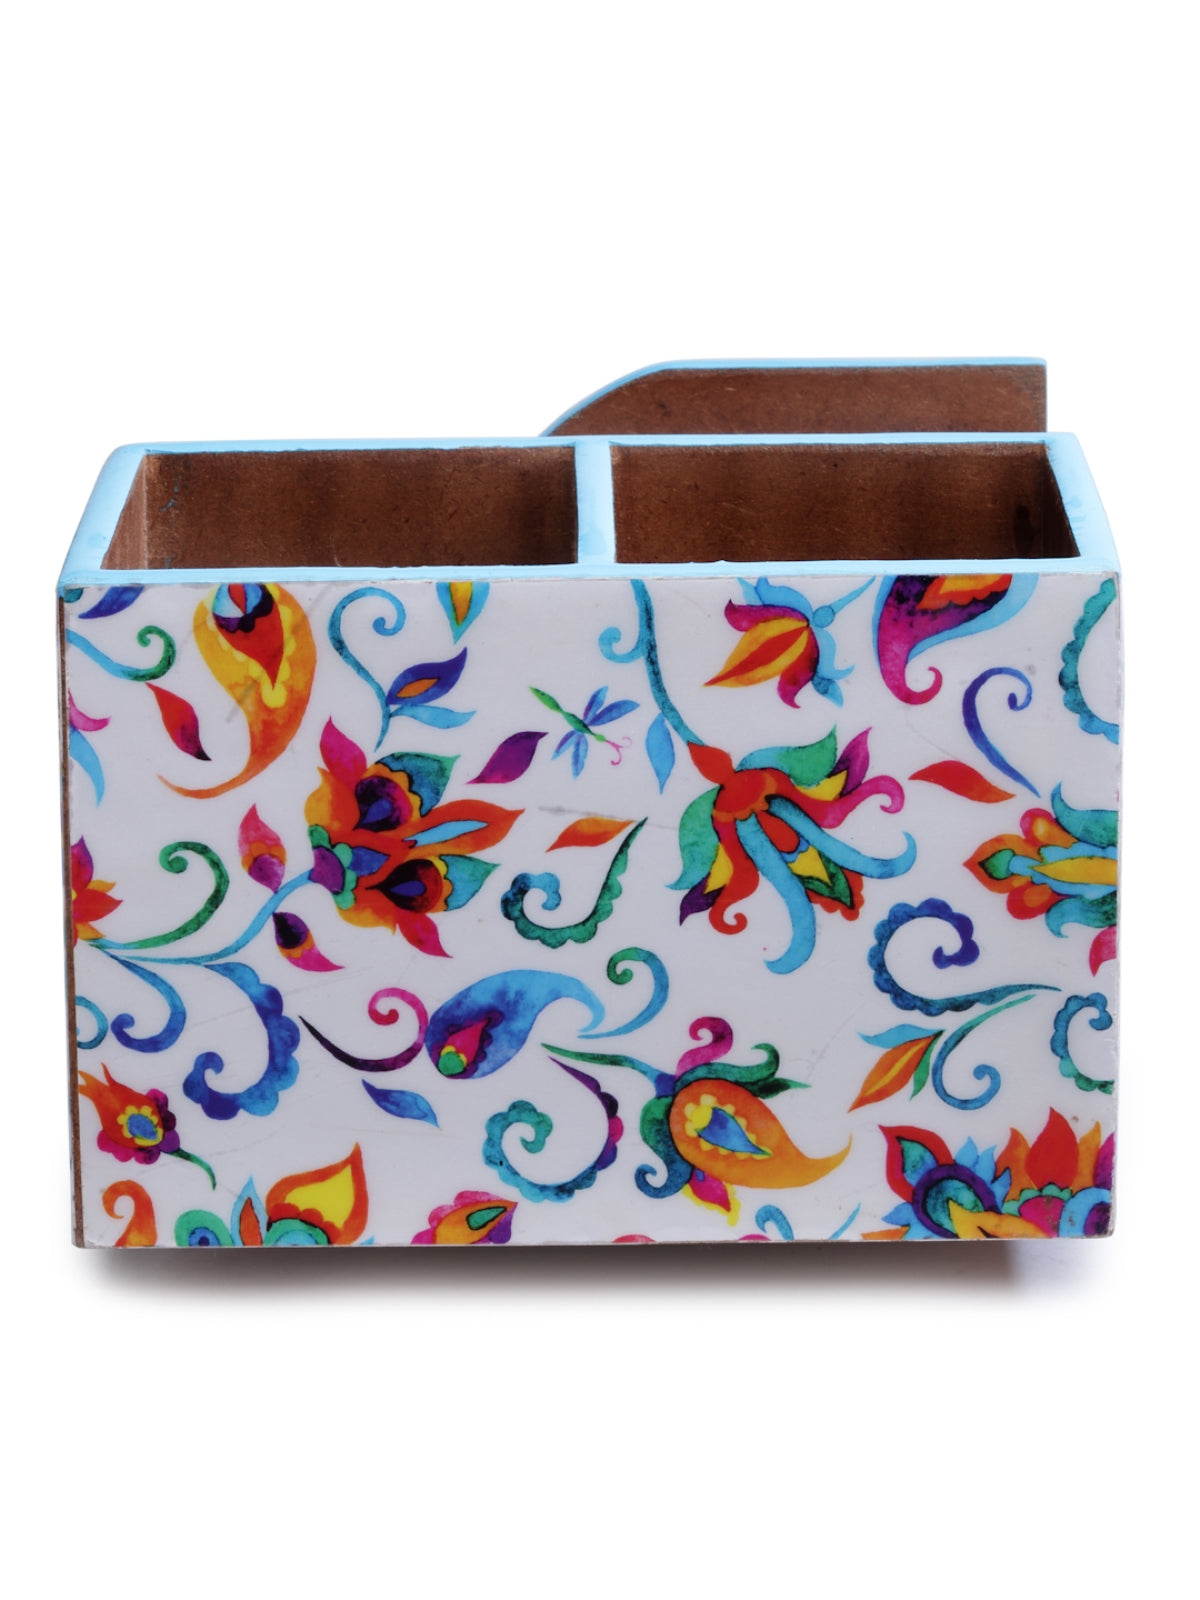 White & Blue Floral Patterned Tissue & Cutlery Holder